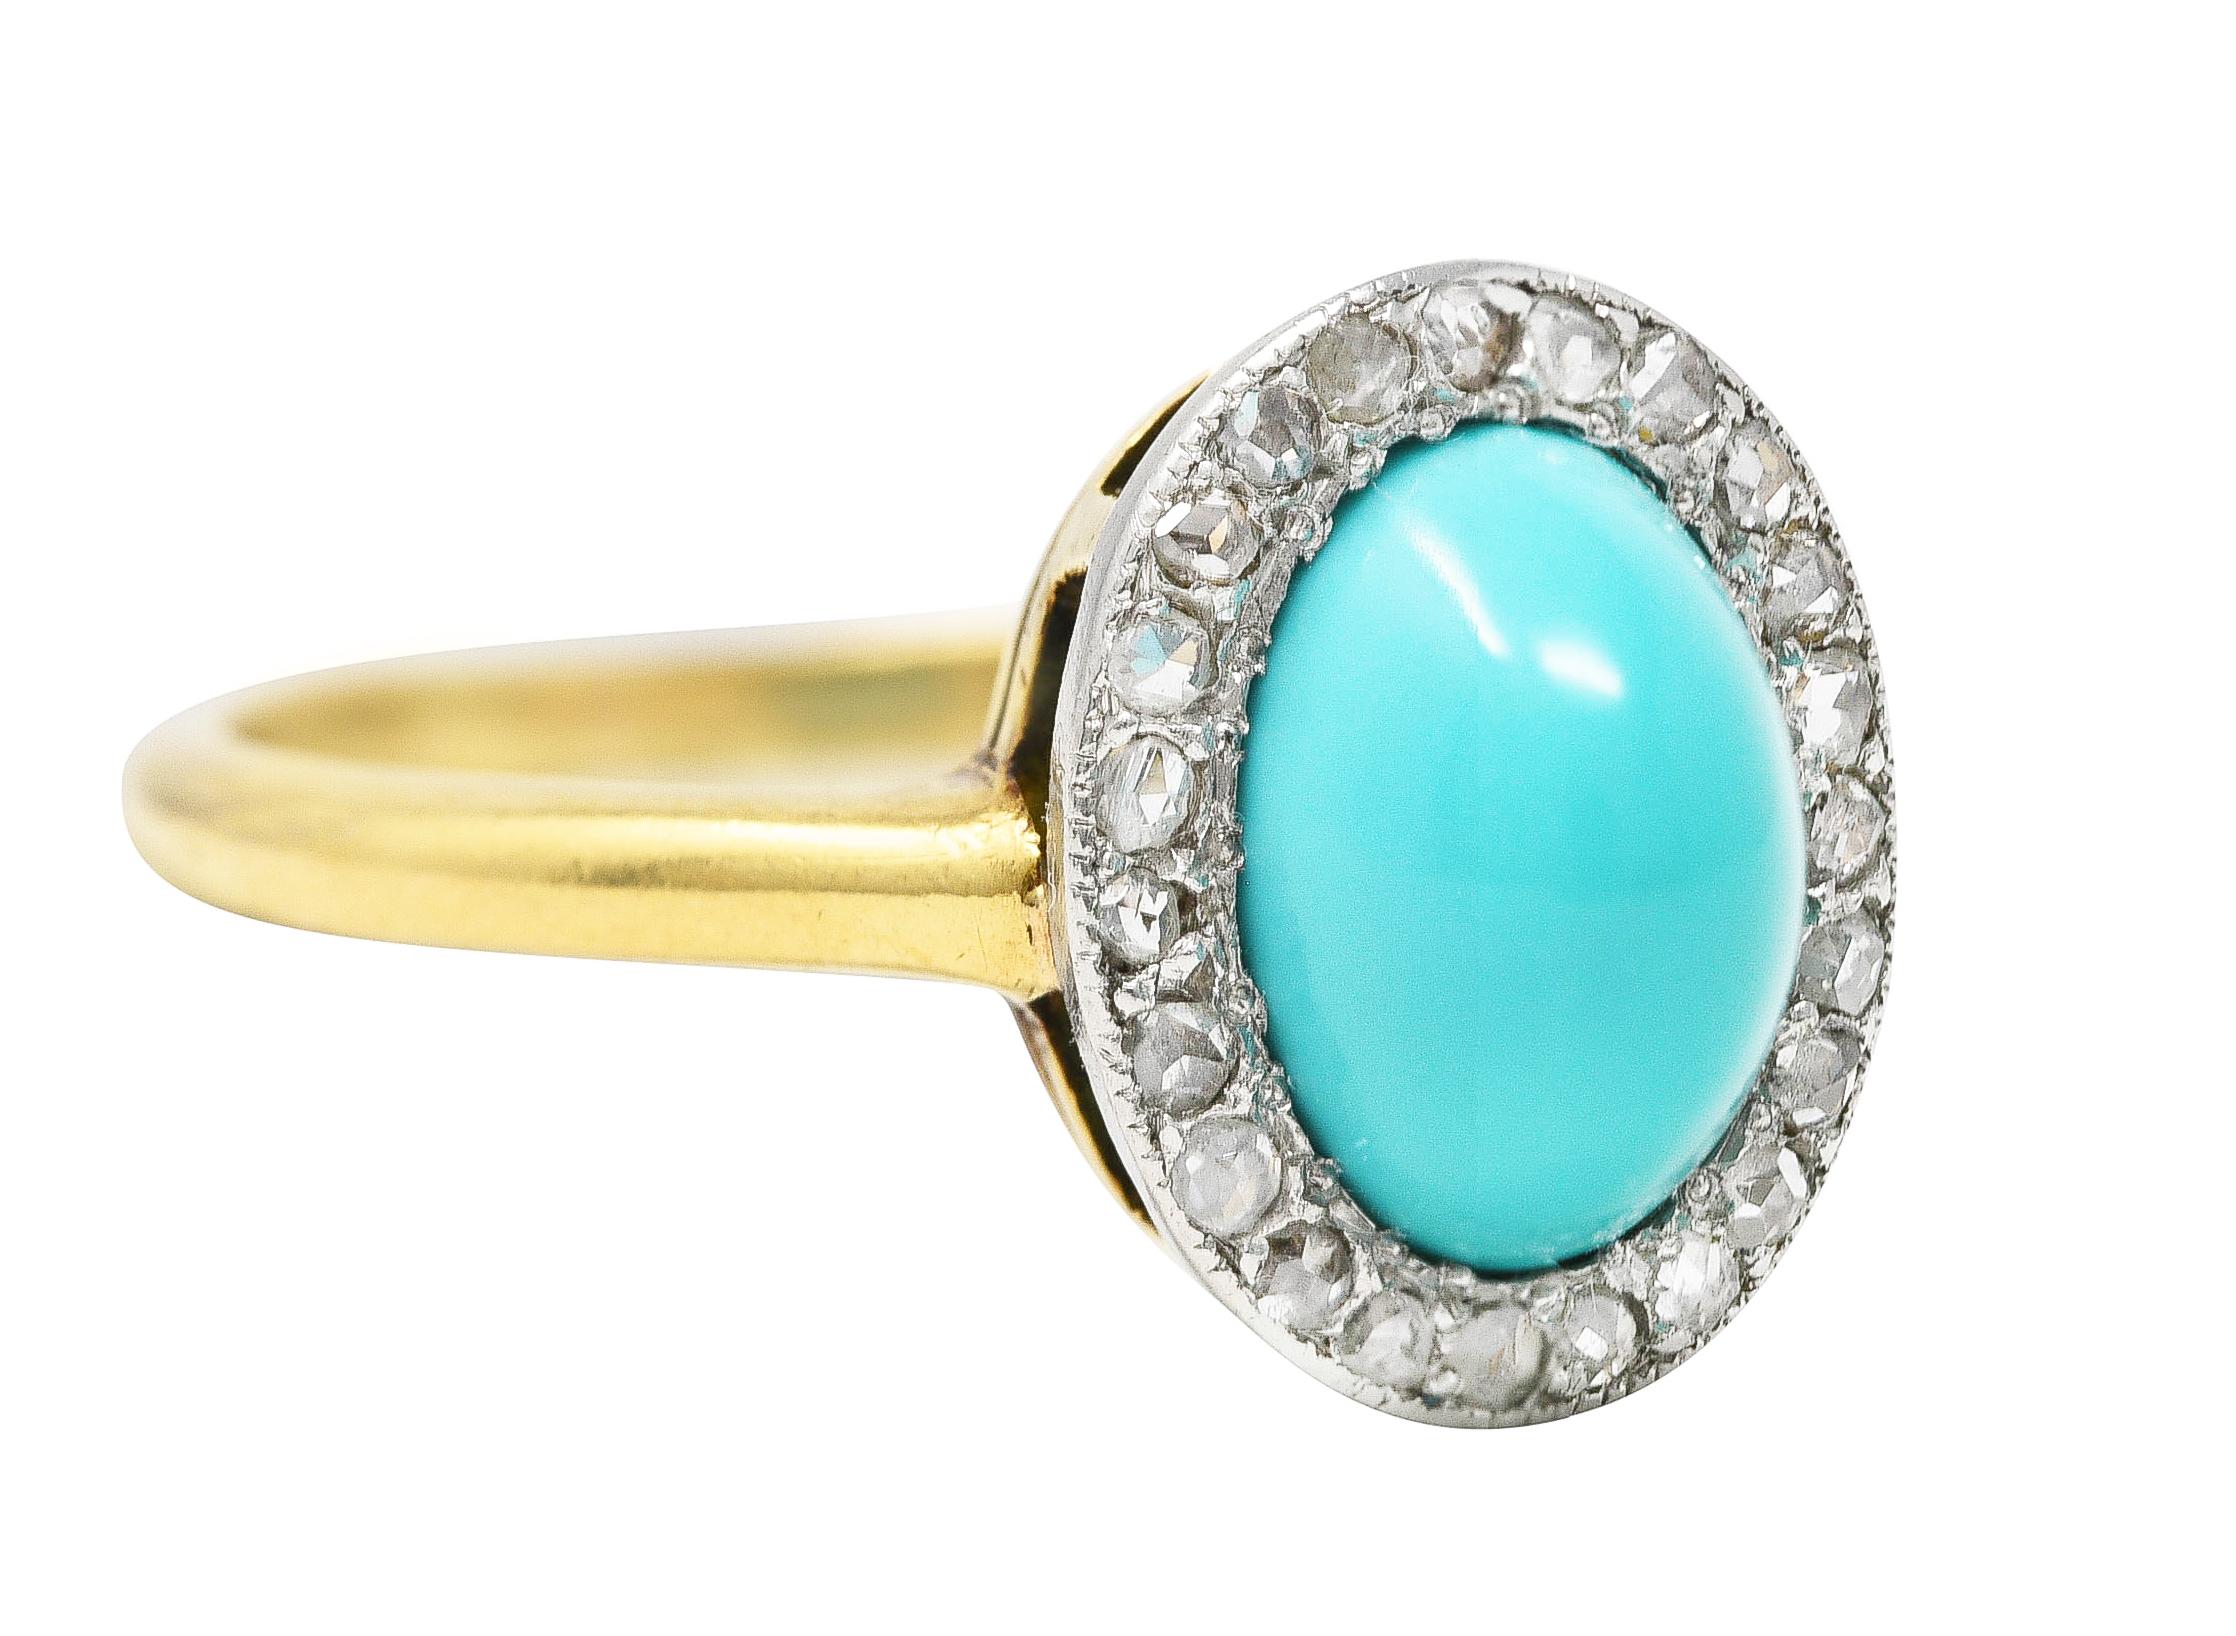 Centering an oval shaped turquoise bullet cabochon measuring 7.0 x 9.0 mm. Opaque and bright robin's egg blue in color - bezel set. Featuring a halo surround of rose cut diamonds. Bead set in platinum - weighing 0.12 carat total. Quality consistent